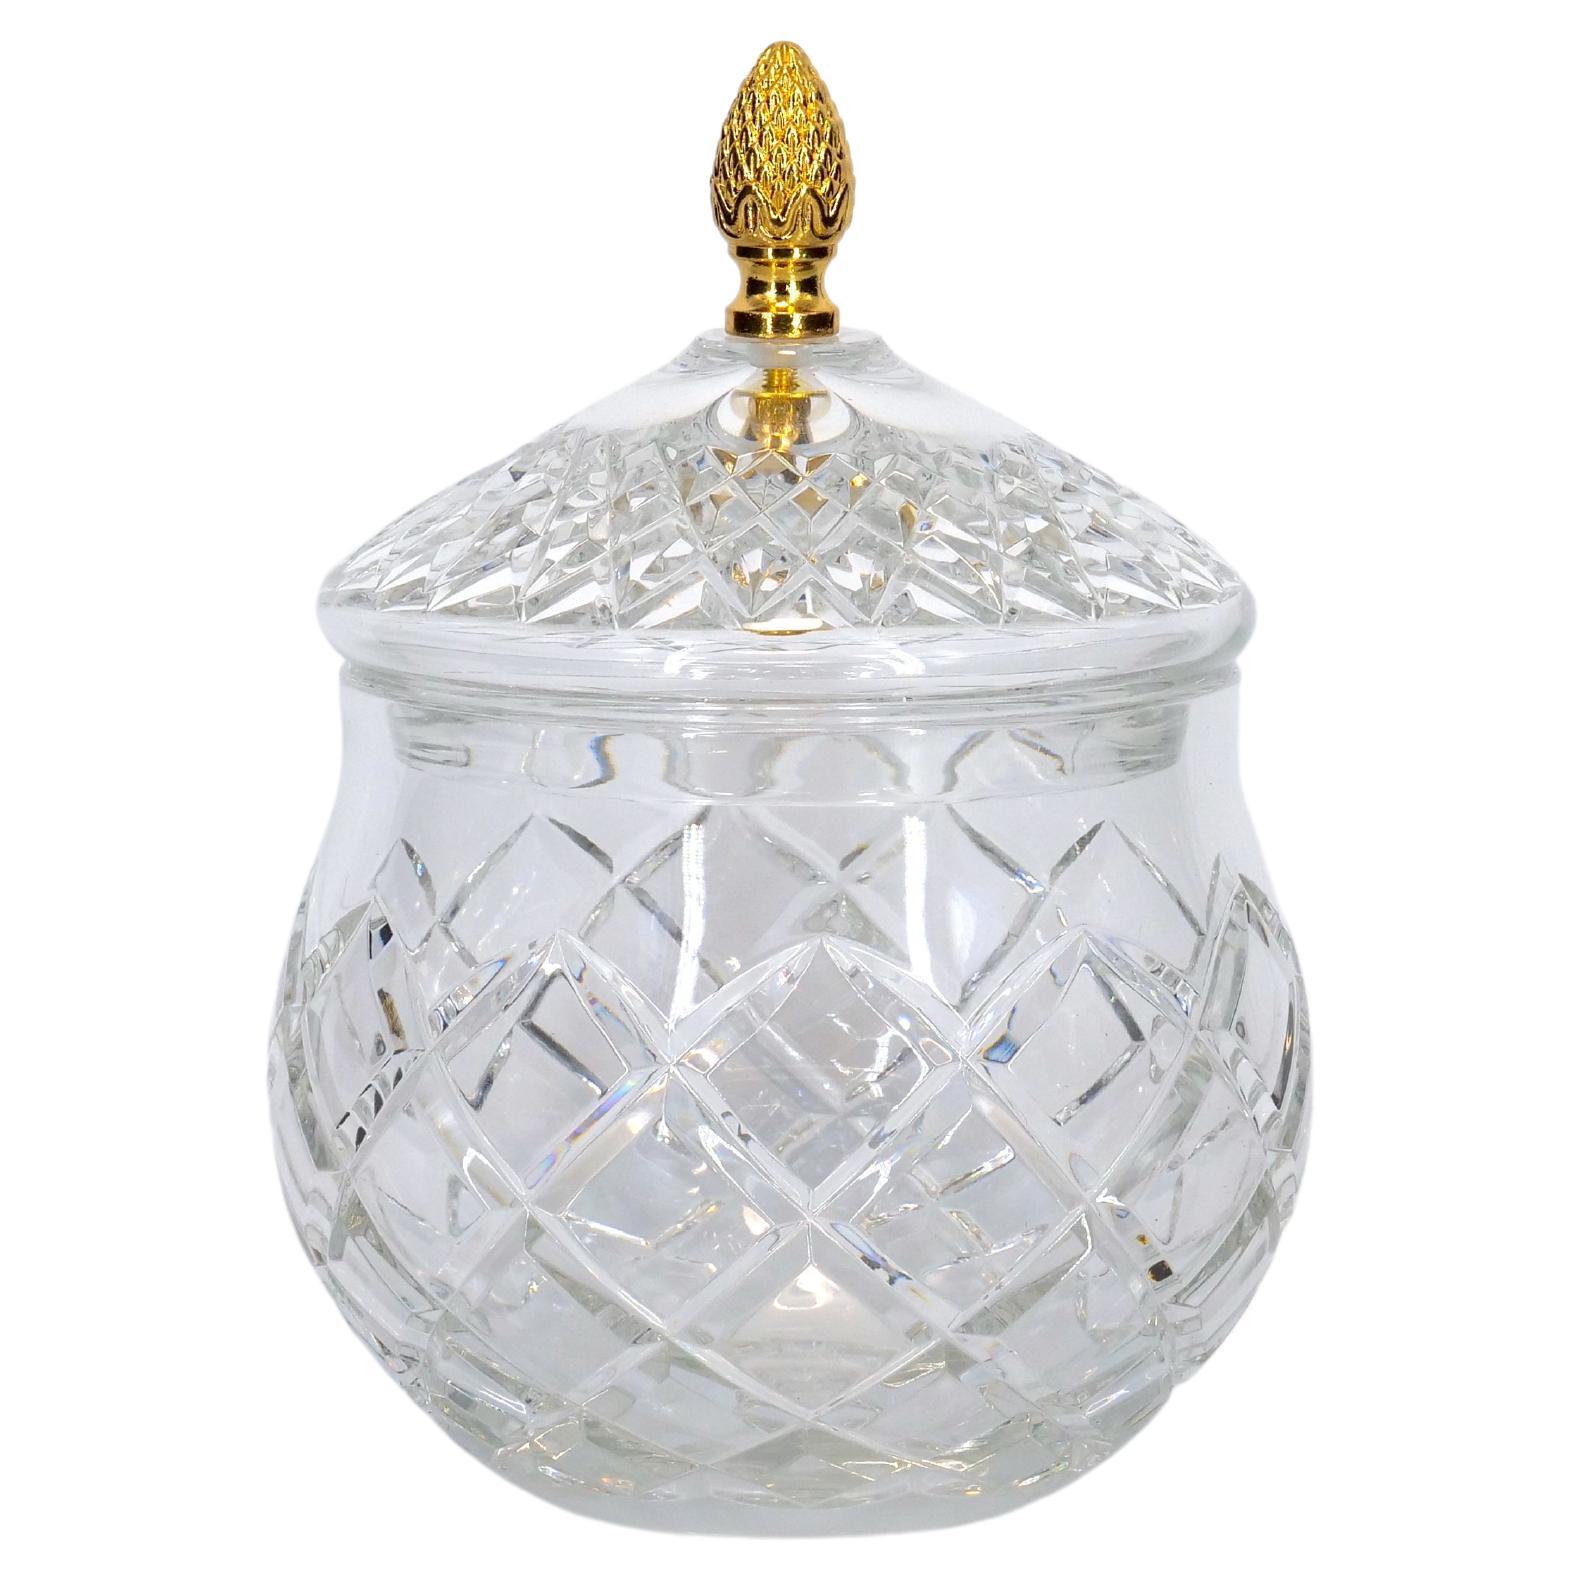 Late 20th Century french cut crystal tableware covered serving piece. The piece features a diamond shape cut crystal details and gilt top brass pinecone finial covers resting on a round base. The piece is in great condition. Maker's mark undersigned